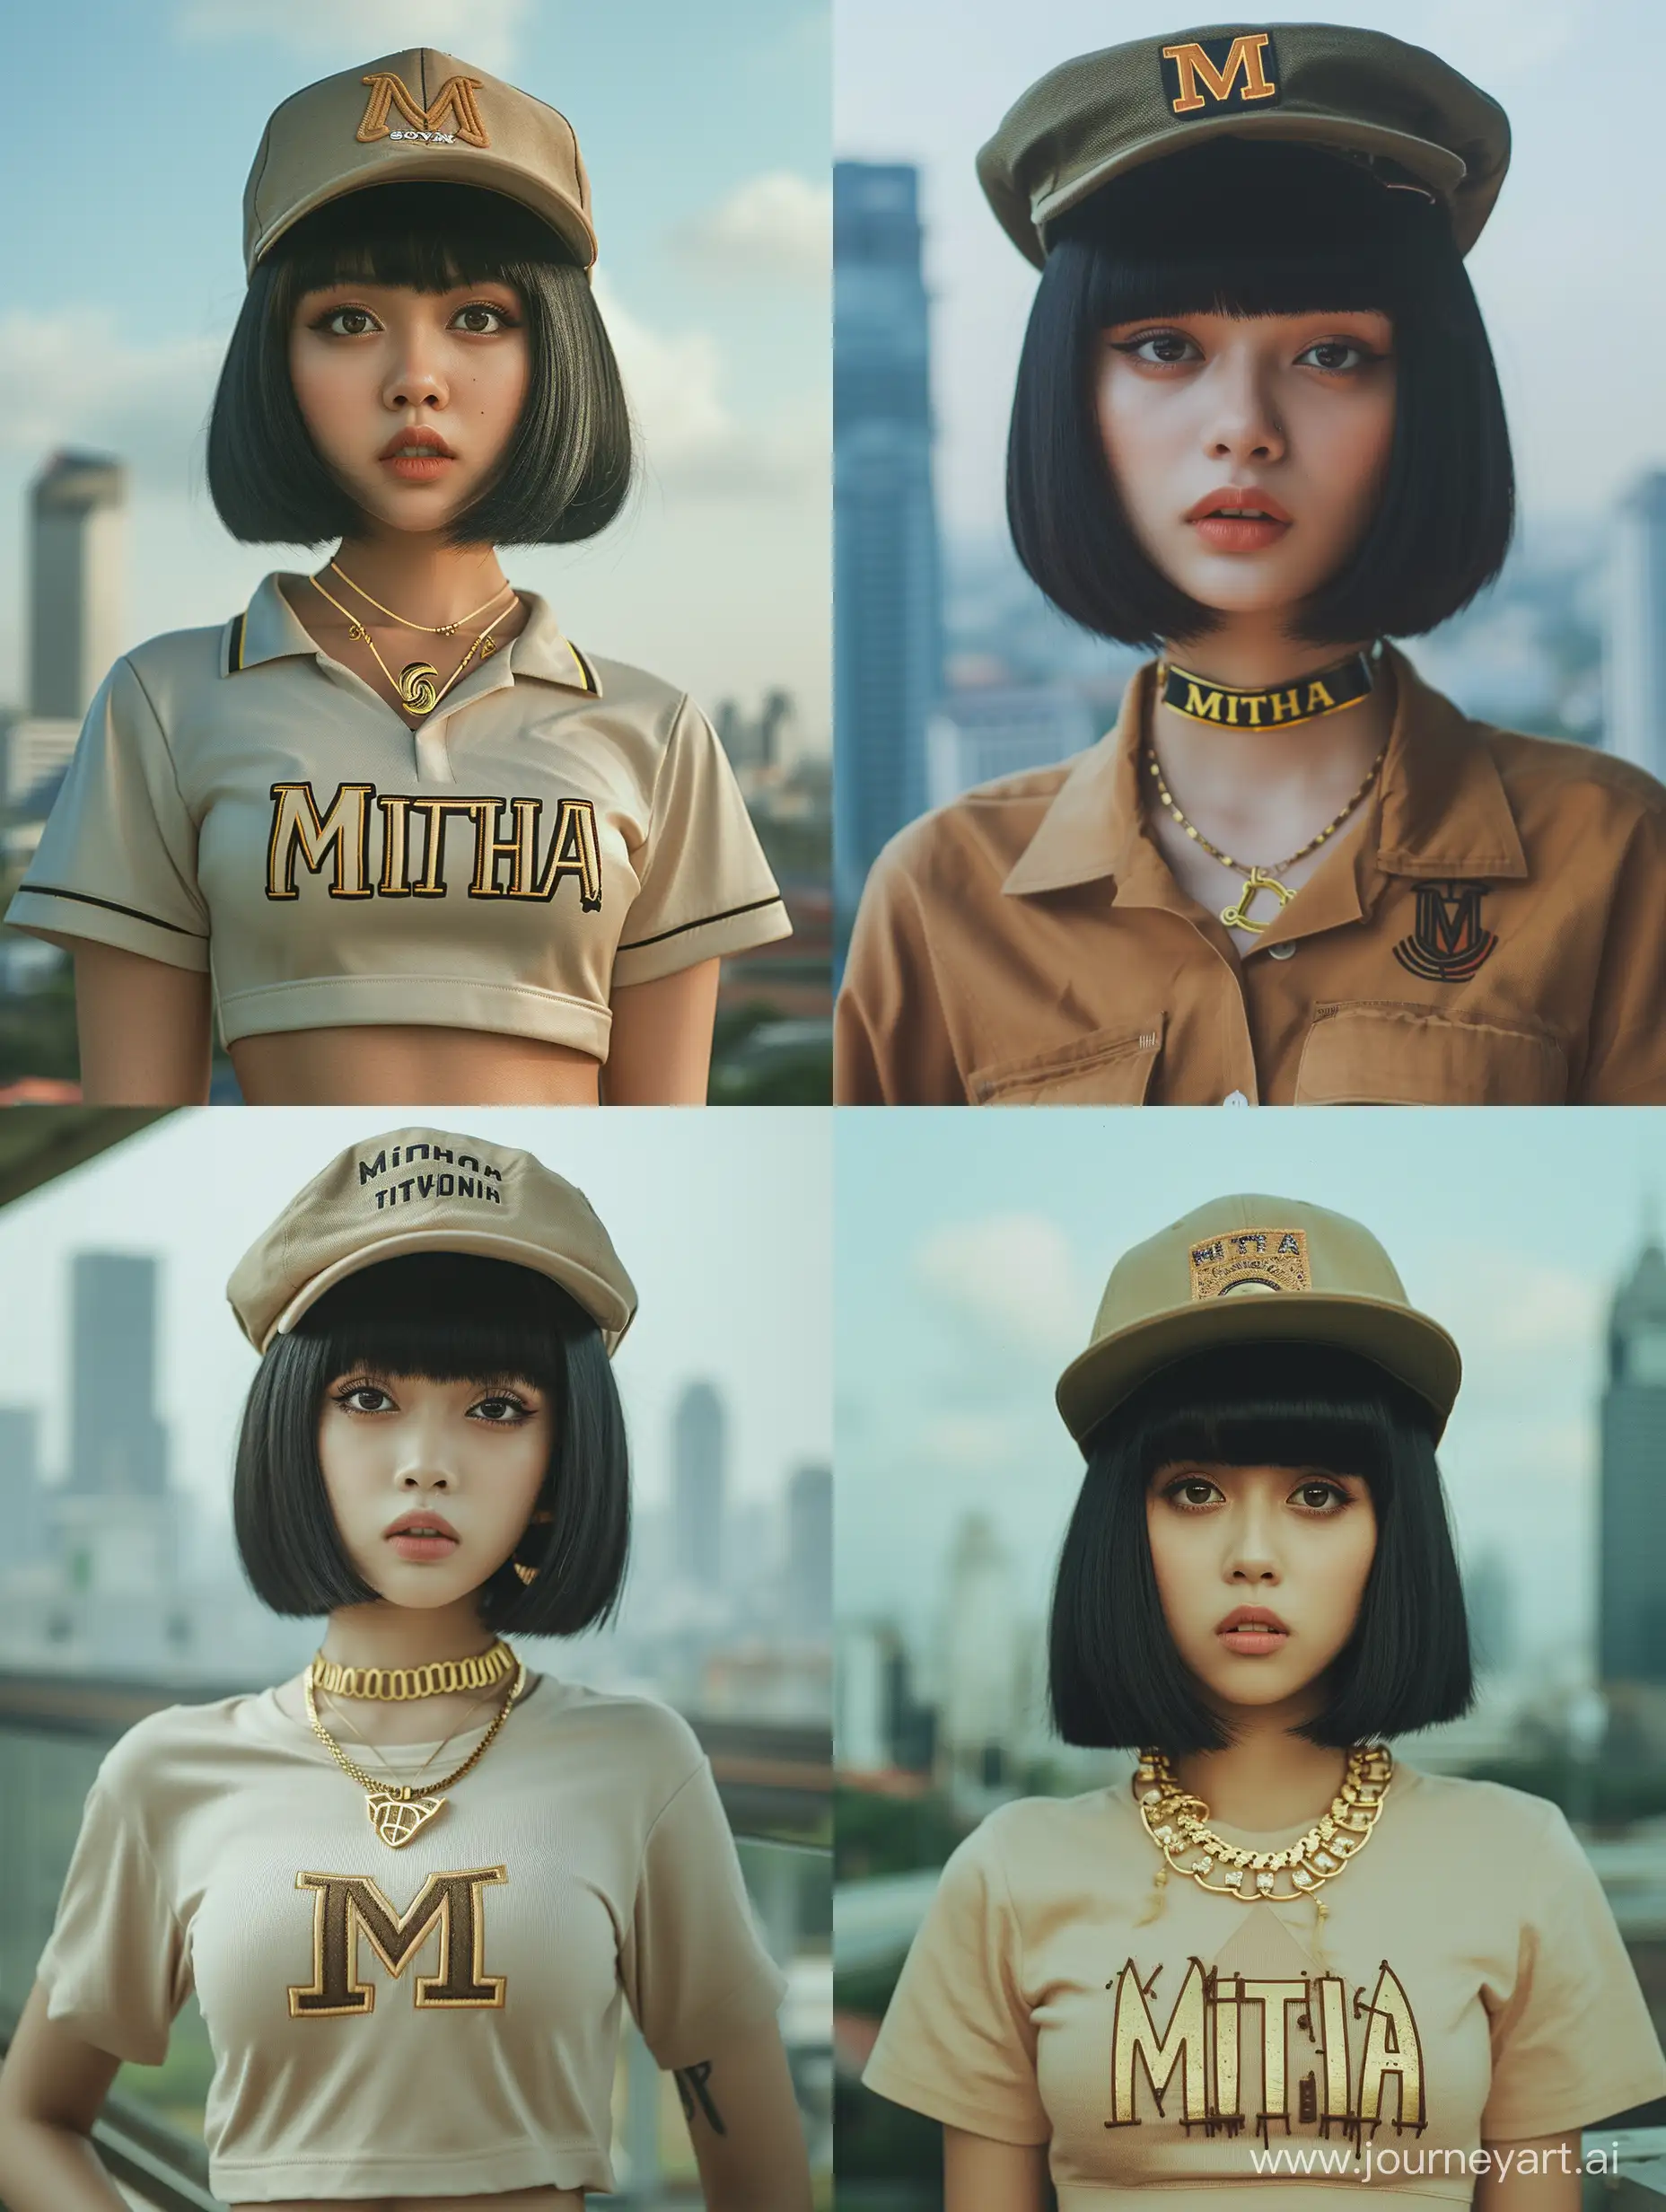 create a realistic photo of a fully body pose women, has a "Mitha" letter on her short shirt, has "M" letter golden necklace , black bob cut hair and brown eyes, cap hat, Jakarta city background, a little smile on her face, award-winning photography, film grain, Portrait, captured by Sony mirrorless camera, DSLR, noon time